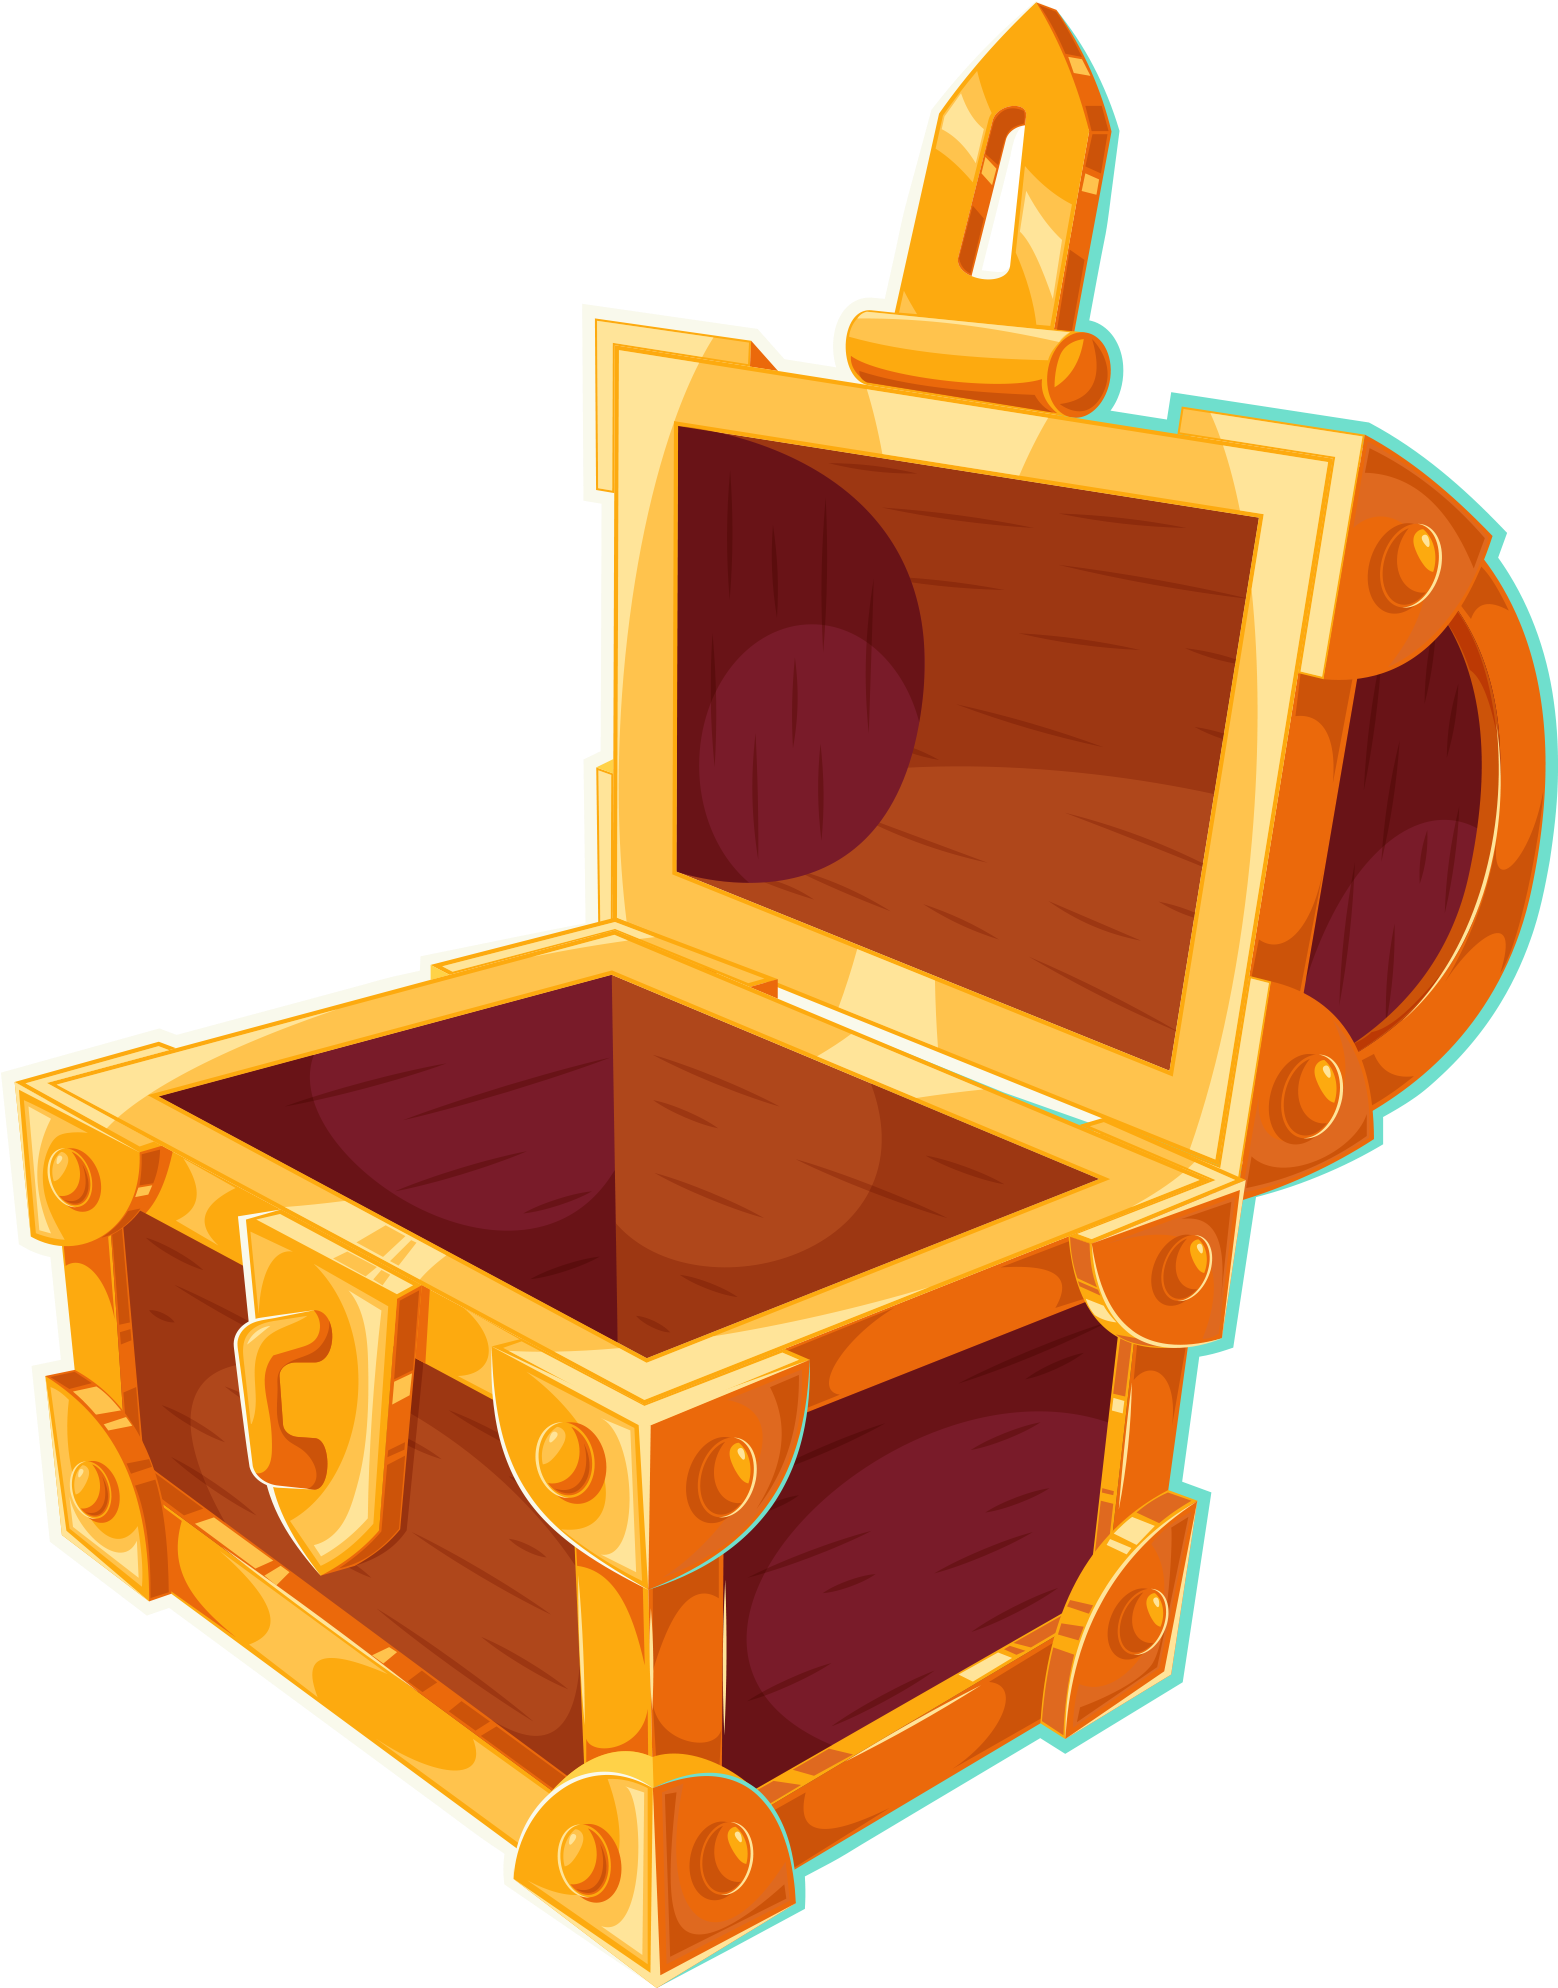 Download - Transparent Background Treasure Chest Clipart Png (2048x2048)